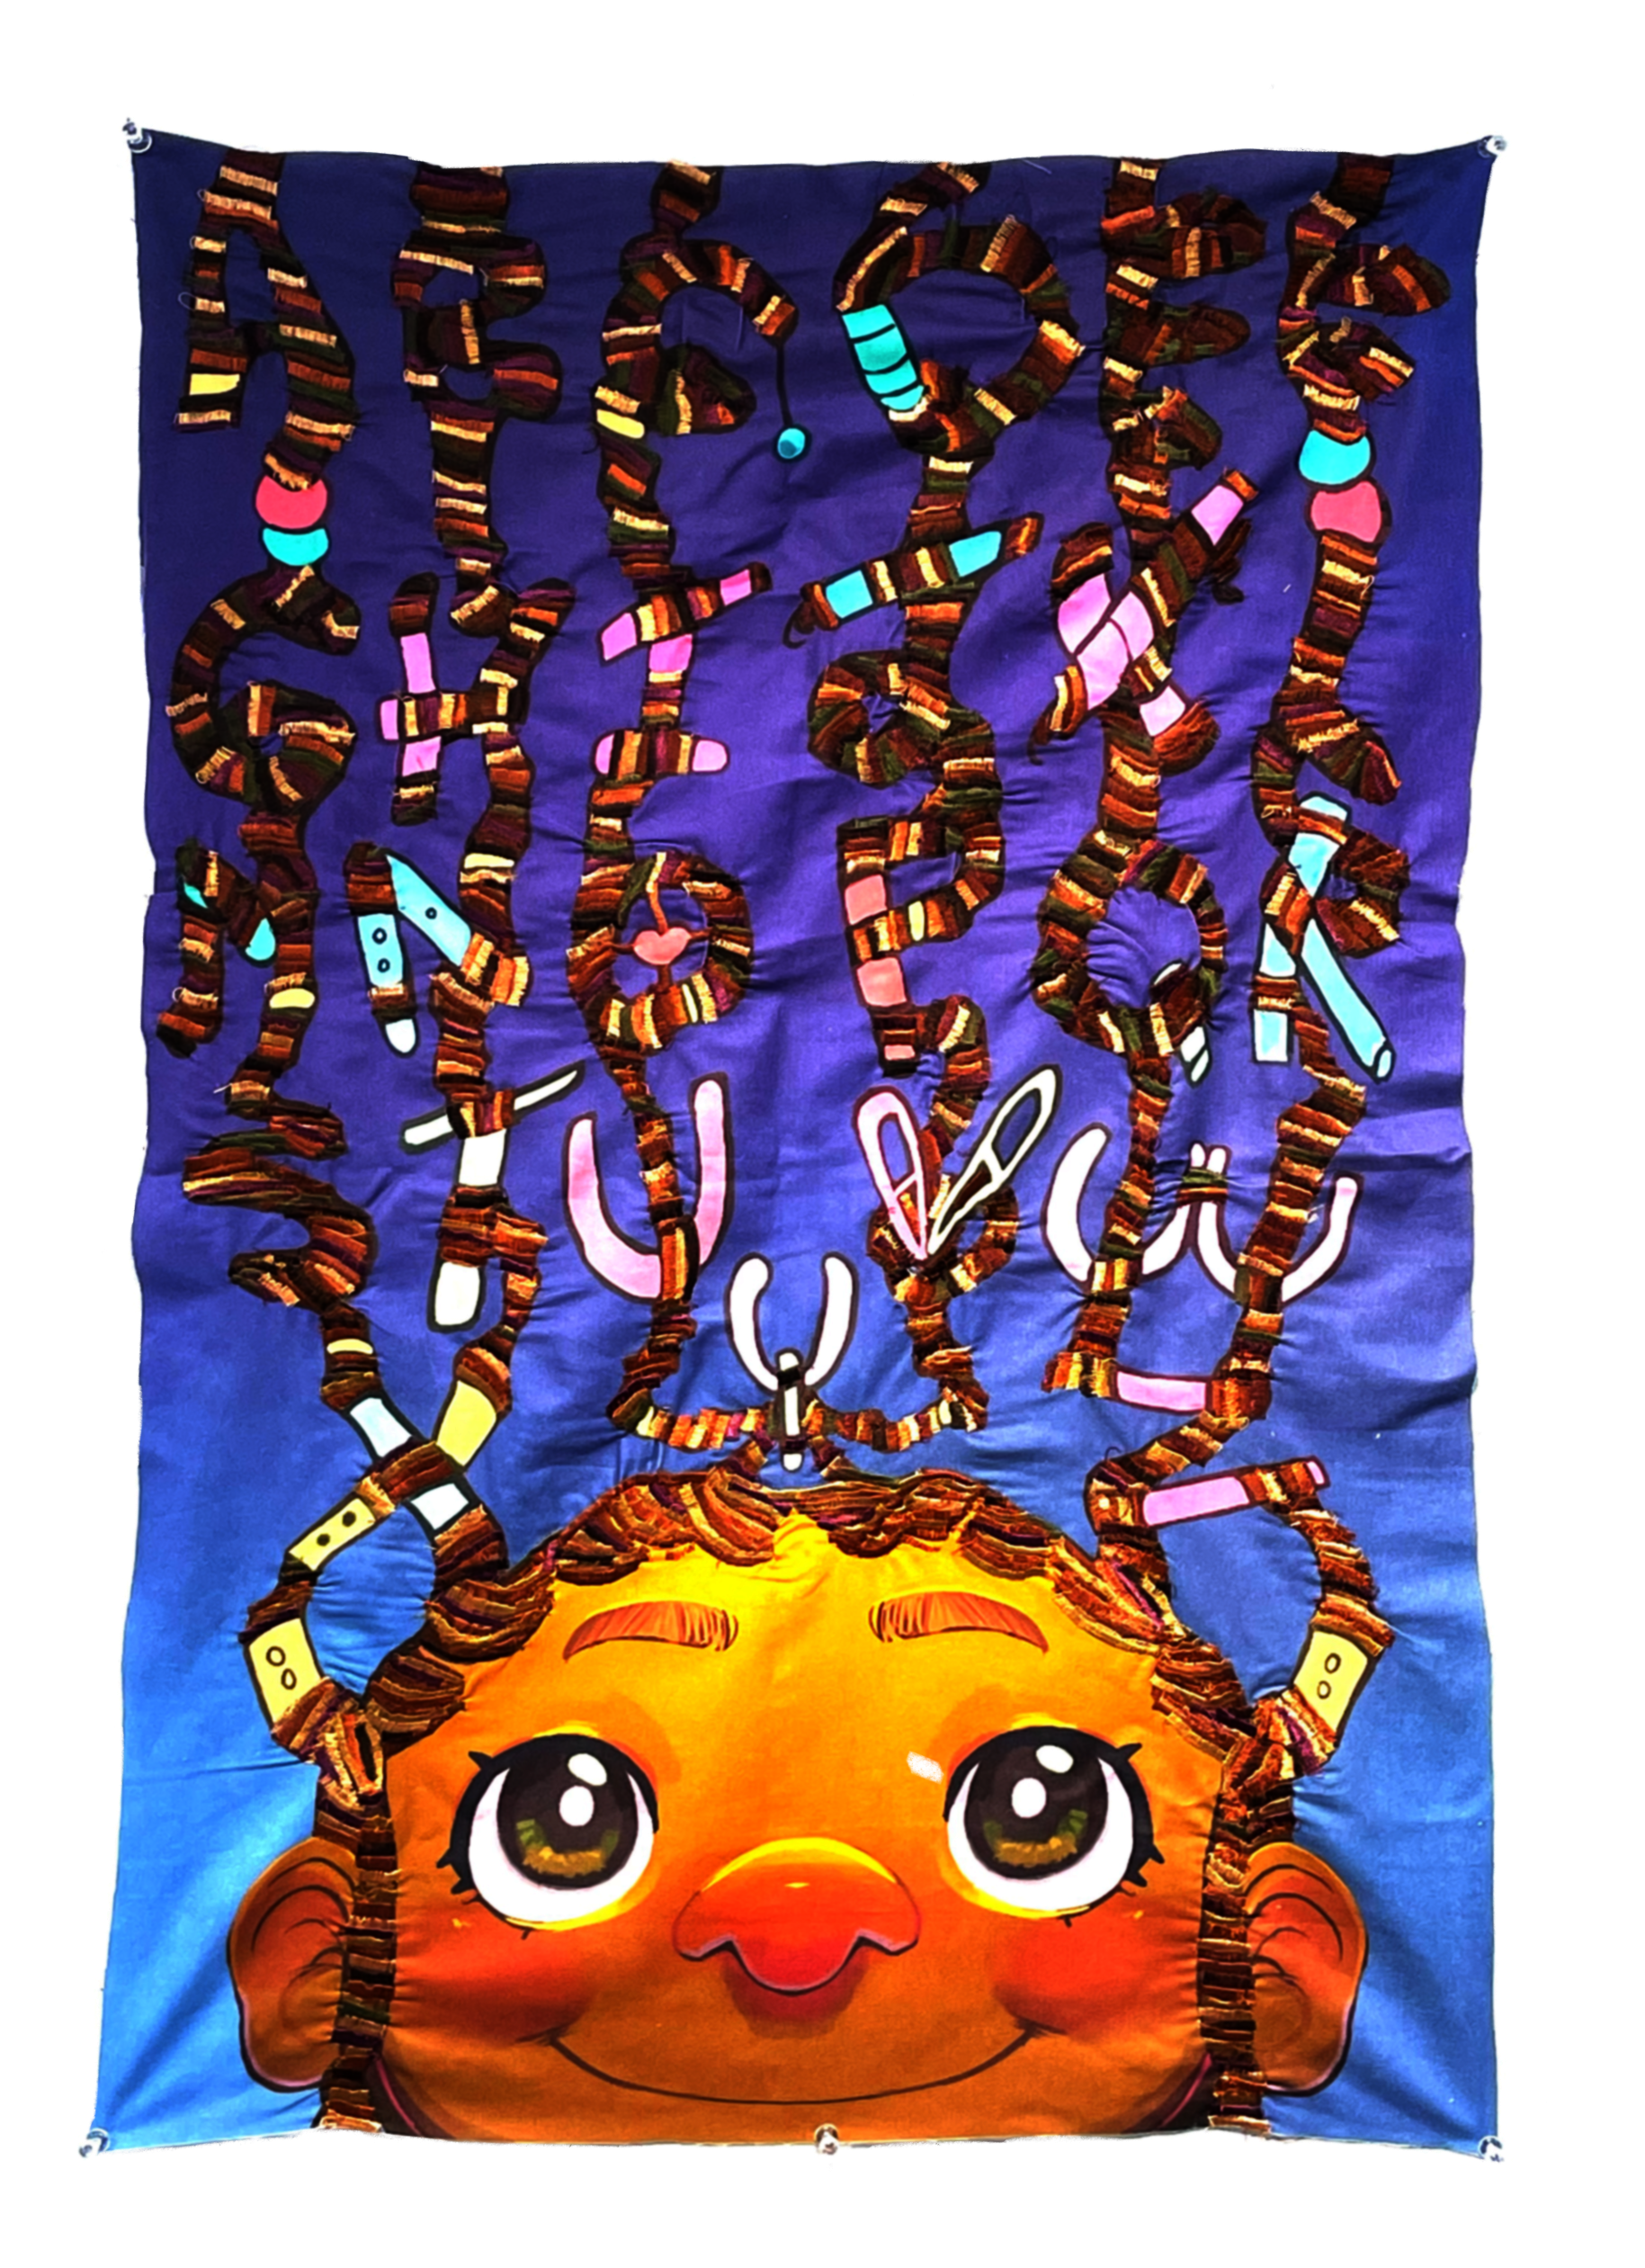 A young black, female child with braids looking up. Blue background. Braids are decorated with beads. Each braid forms the letters of the ABCs. The braids thread painted in brown, orange, and purple tones.